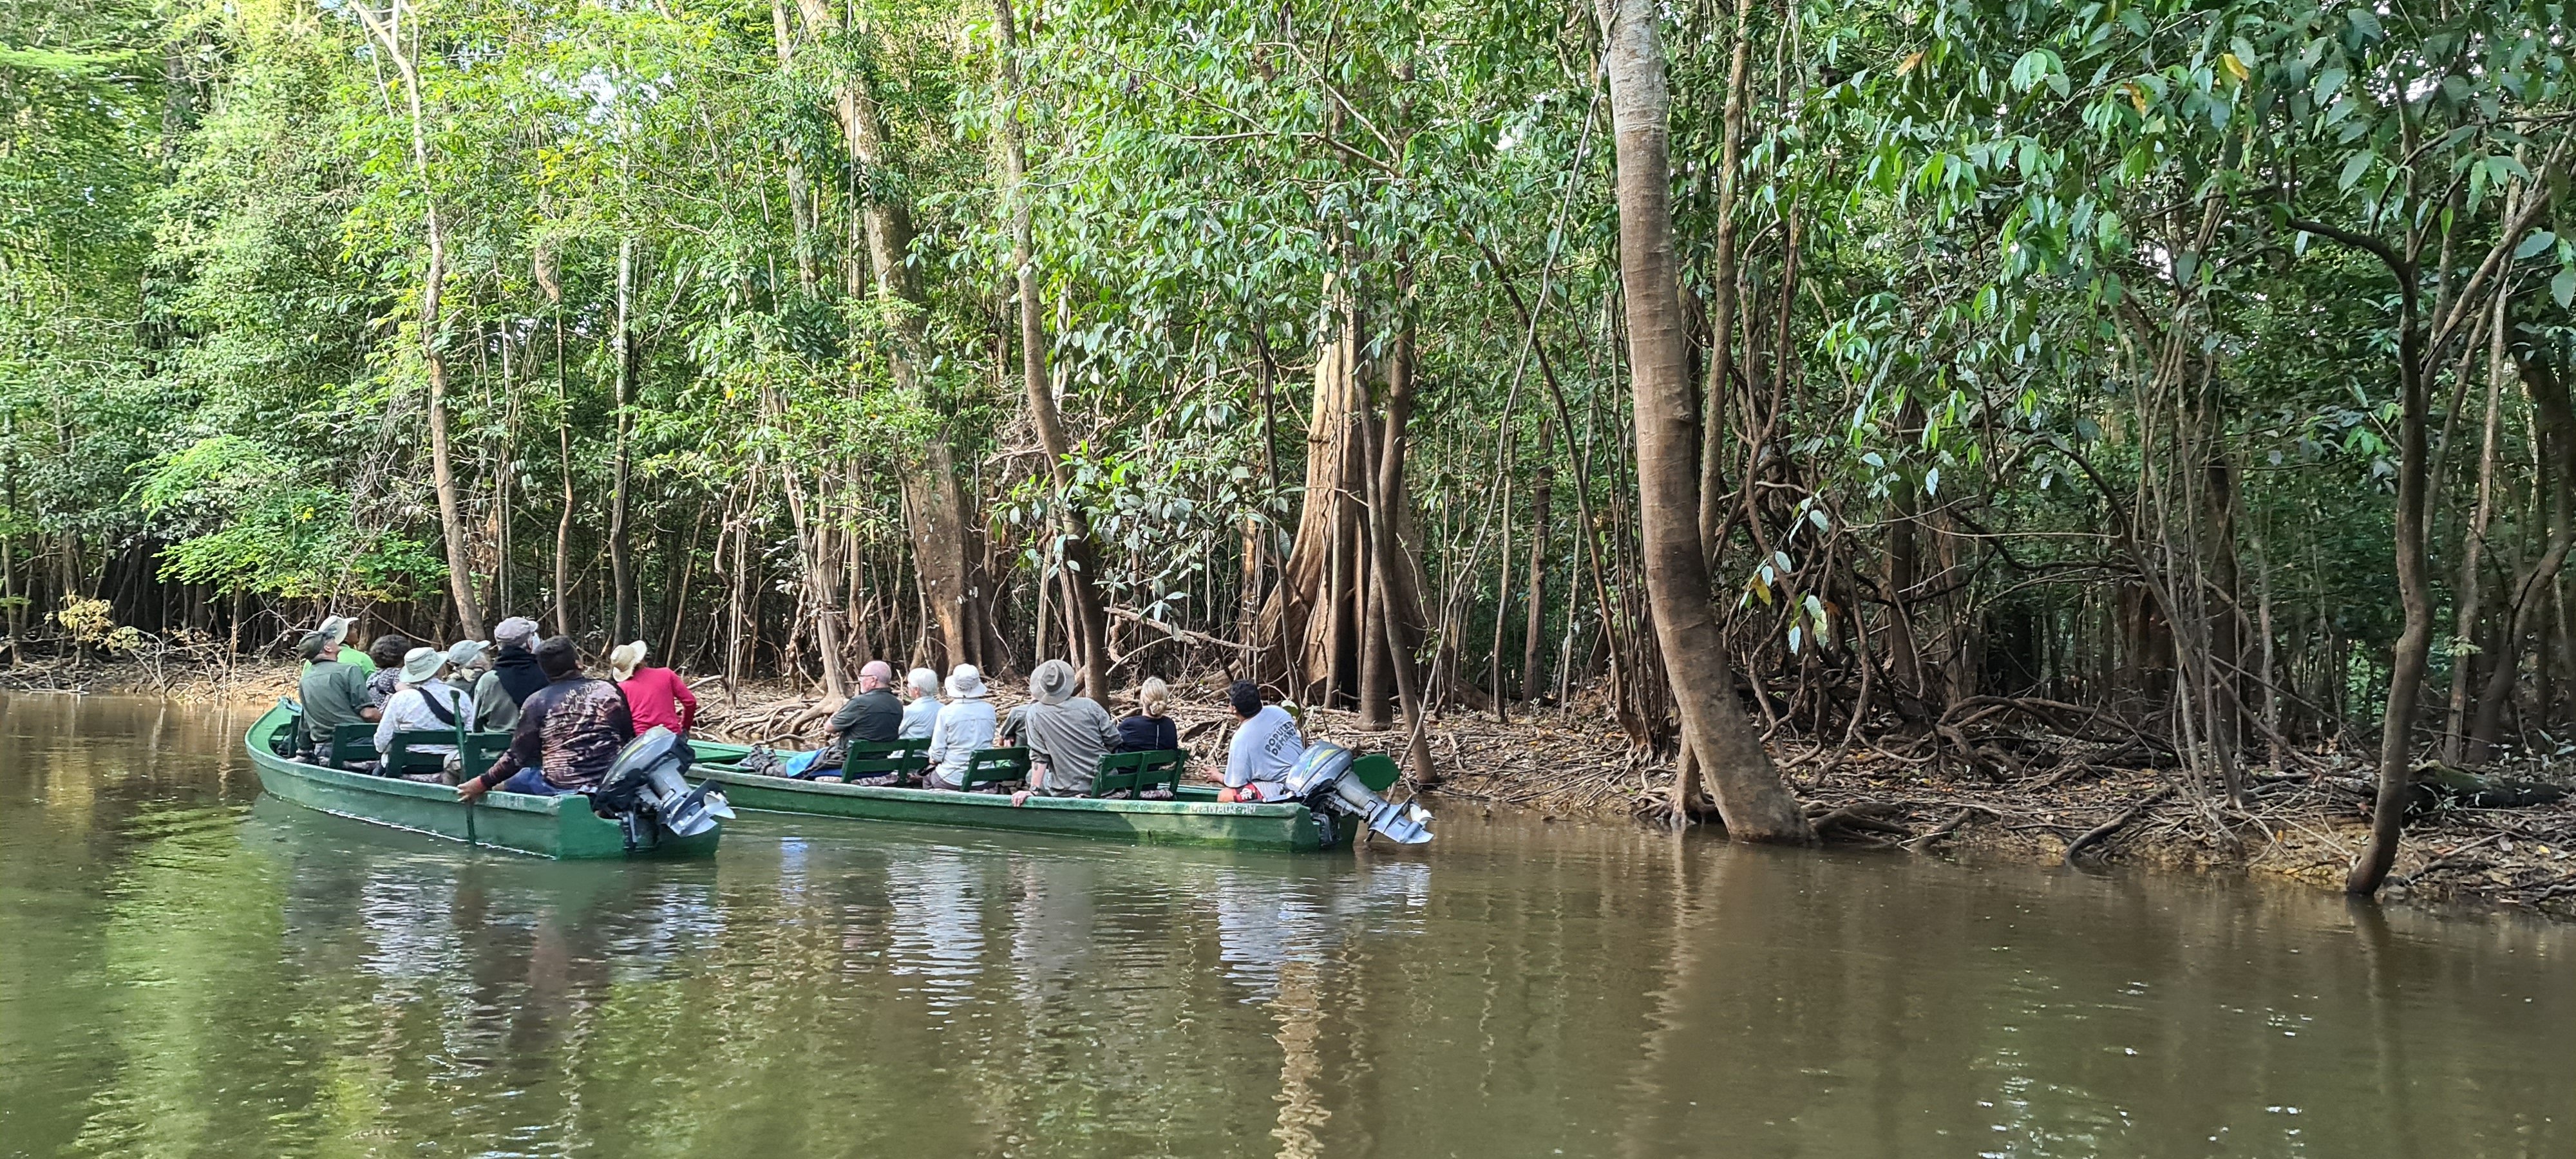 Looking for wildlife from our canoes CPC Remote Amazon canoe scenic CPC 20220913_165832